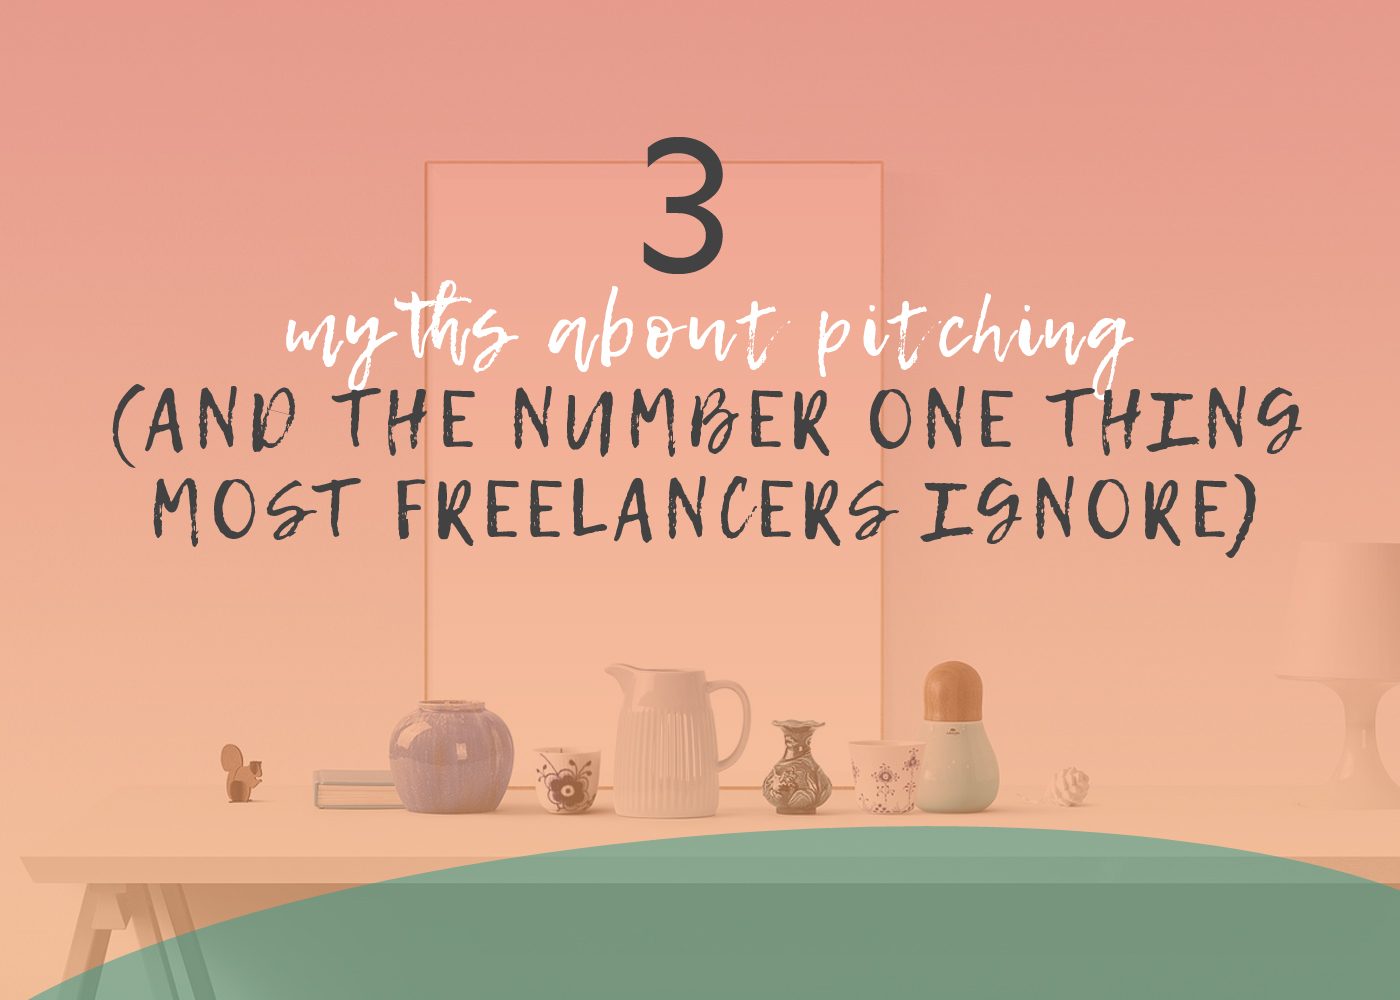 3 Myths About Pitching (and the Number One Thing Most Freelancers Ignore)